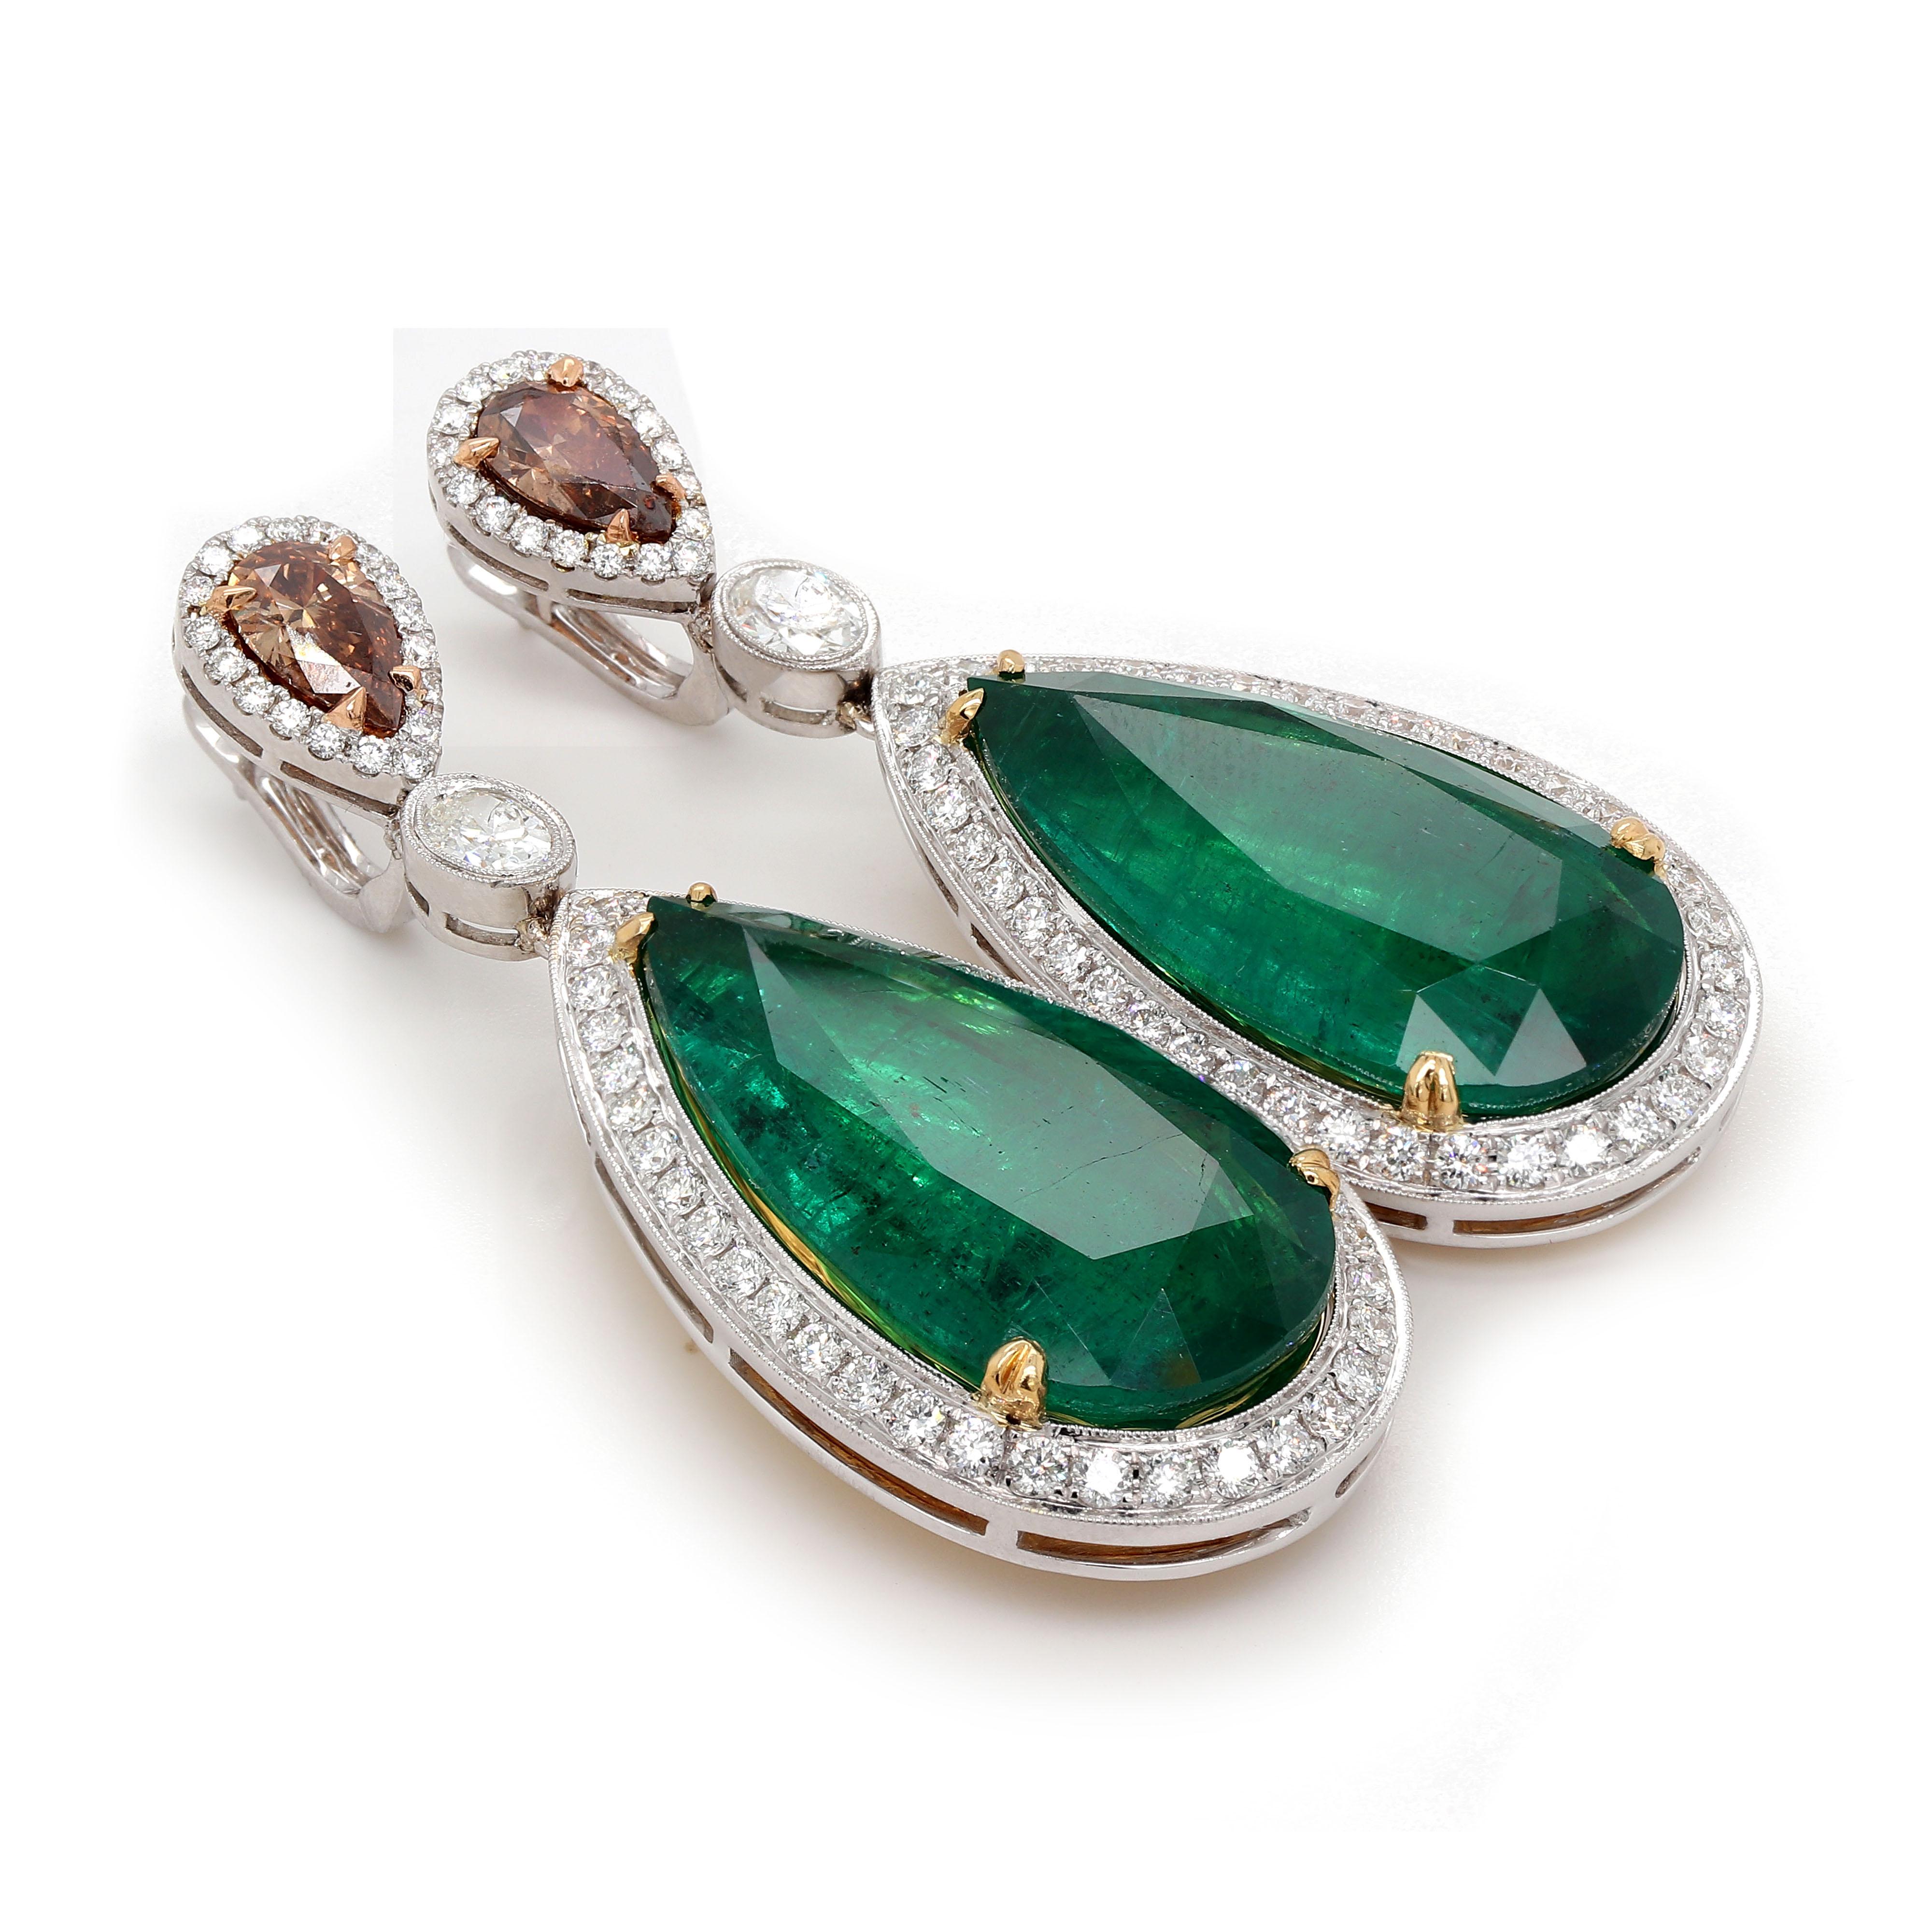 Dangle earrings includes 2 pear shape Emeralds of about 33.07 carats and 2 pear shape brown diamonds of about 1.35 carats. It also includes 2 oval shape diamonds of about 0.61 carats with a Clarity VS and Color G. They are surrounded by 112 round